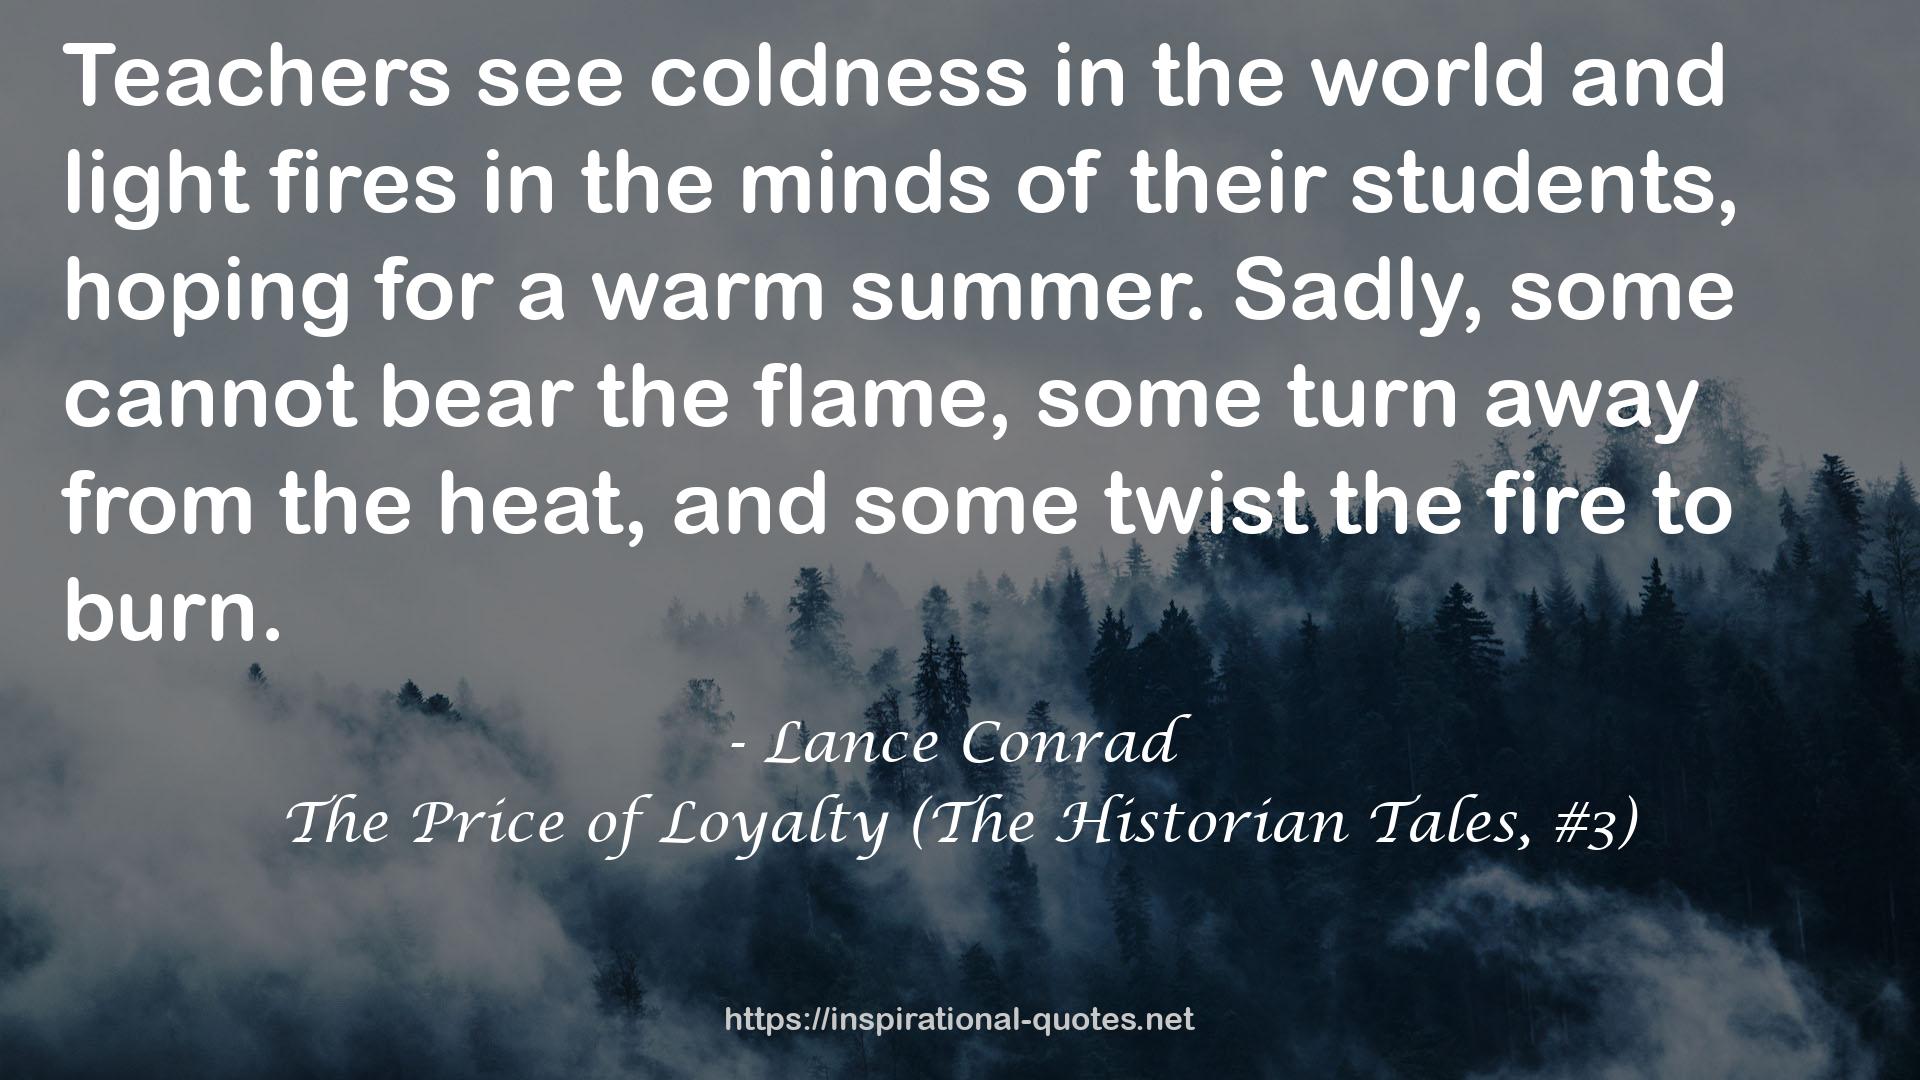 The Price of Loyalty (The Historian Tales, #3) QUOTES